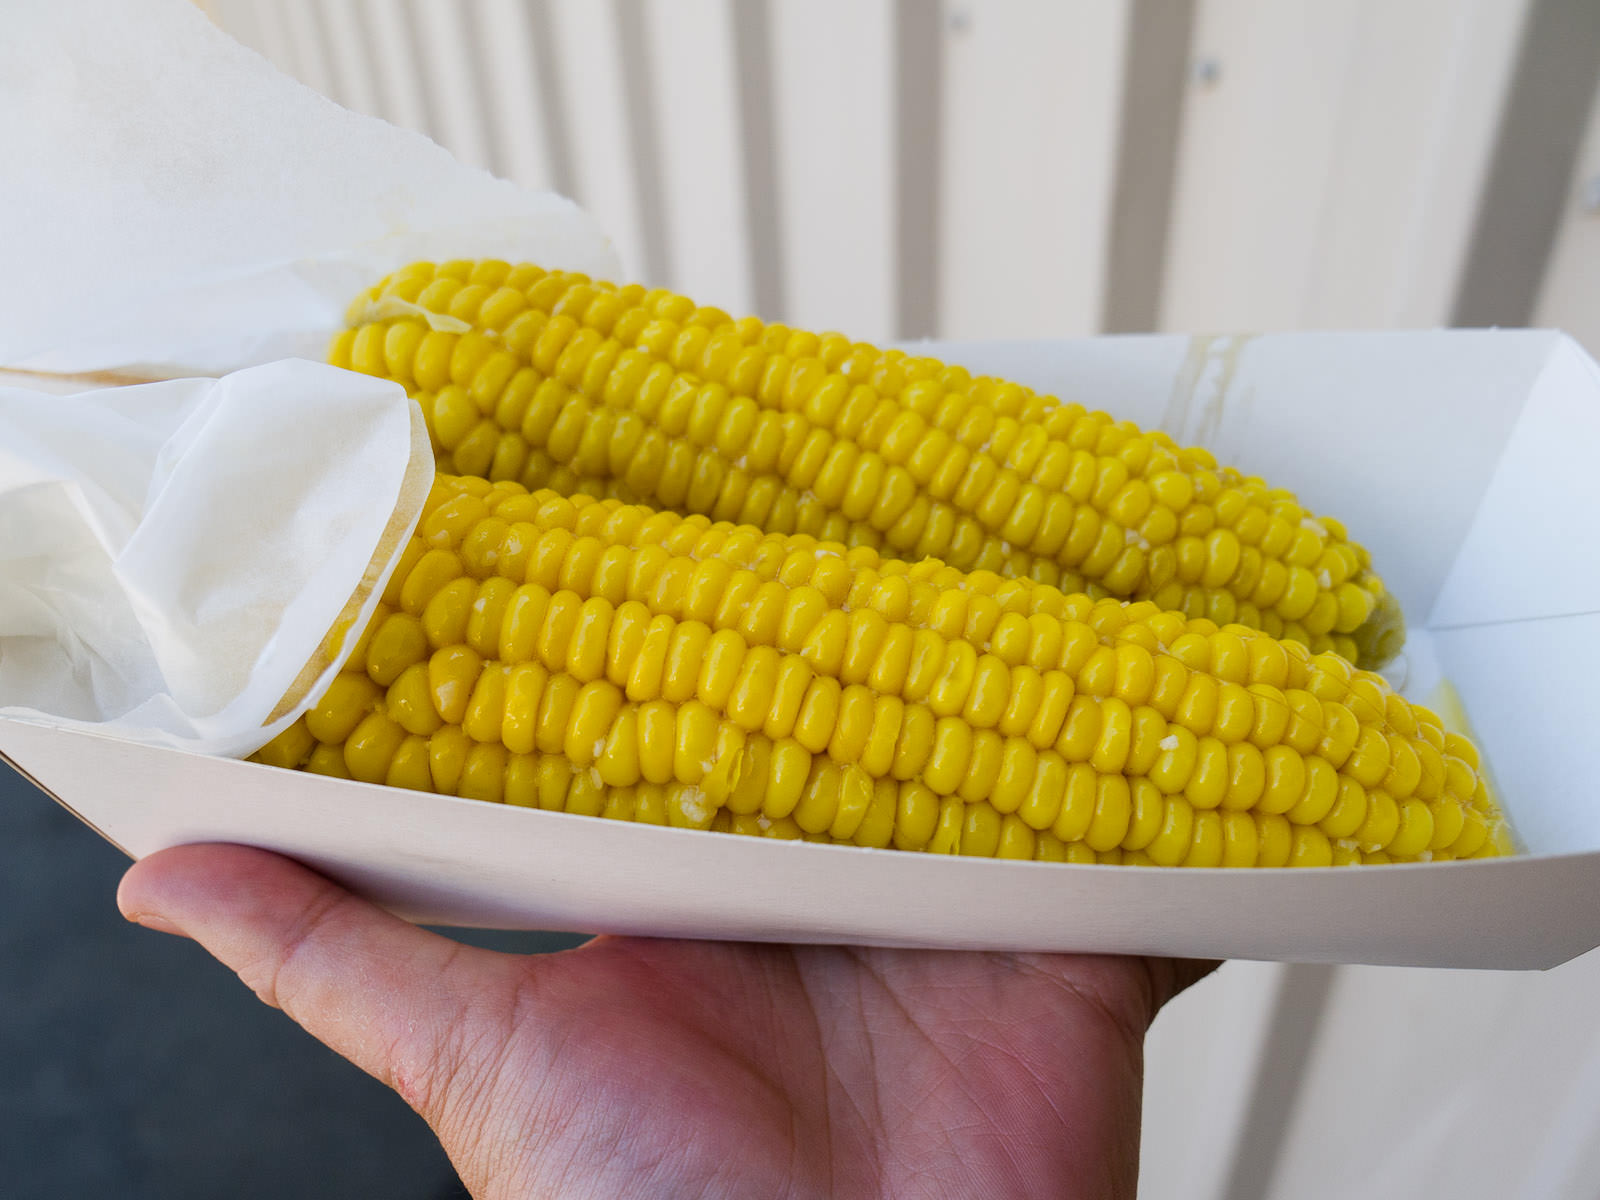 Hot buttered corn with garlic butter